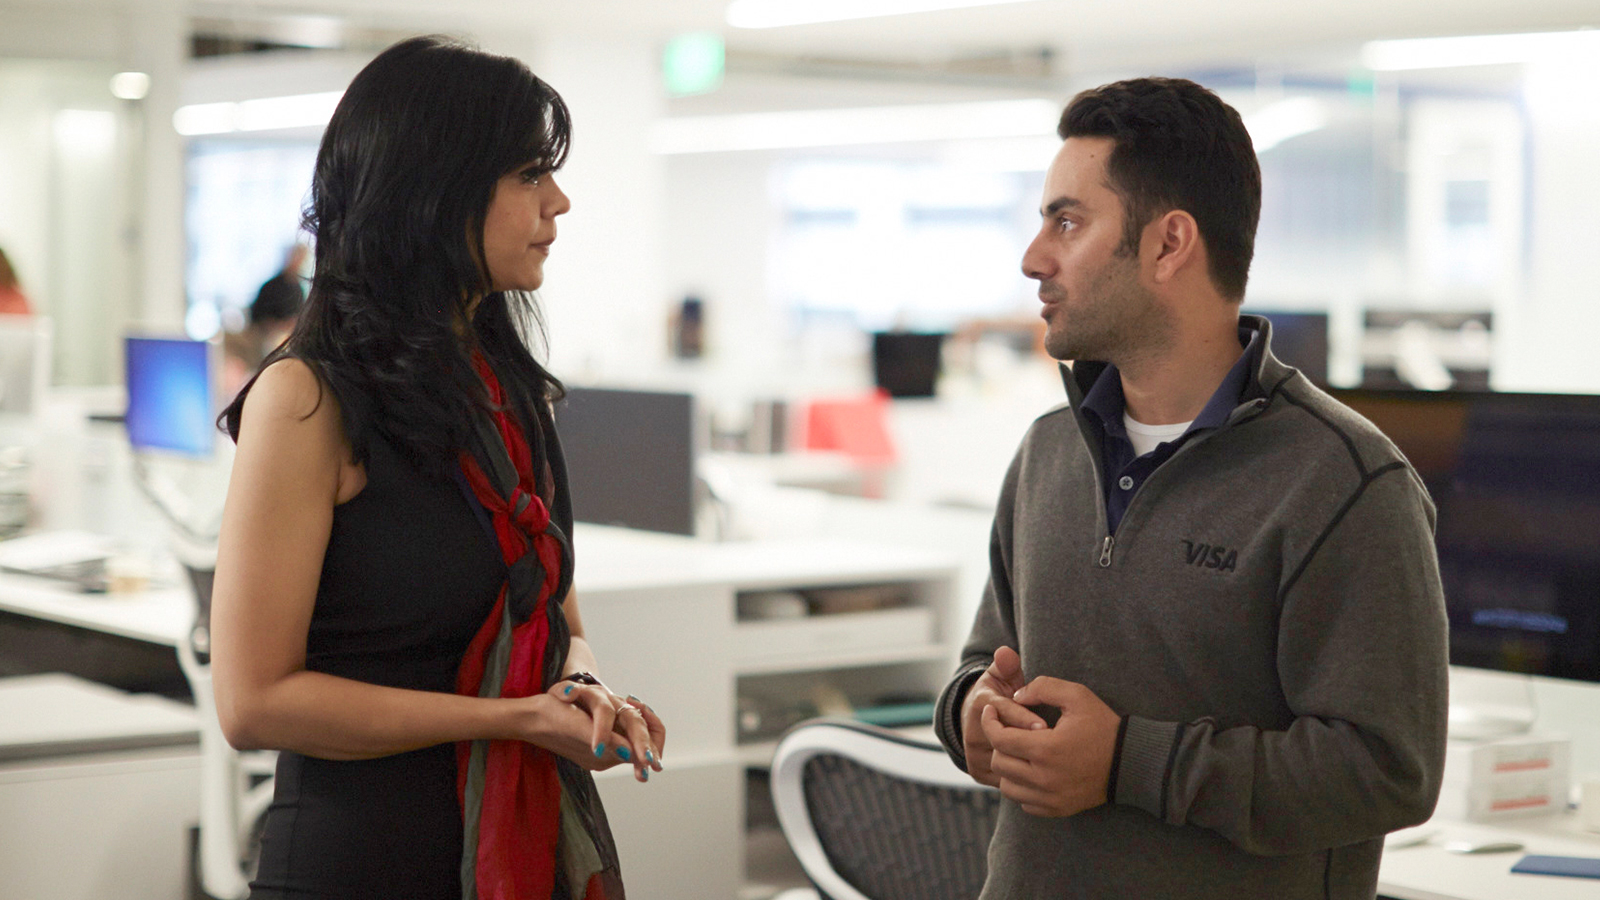 Woman and man discussing topic in office